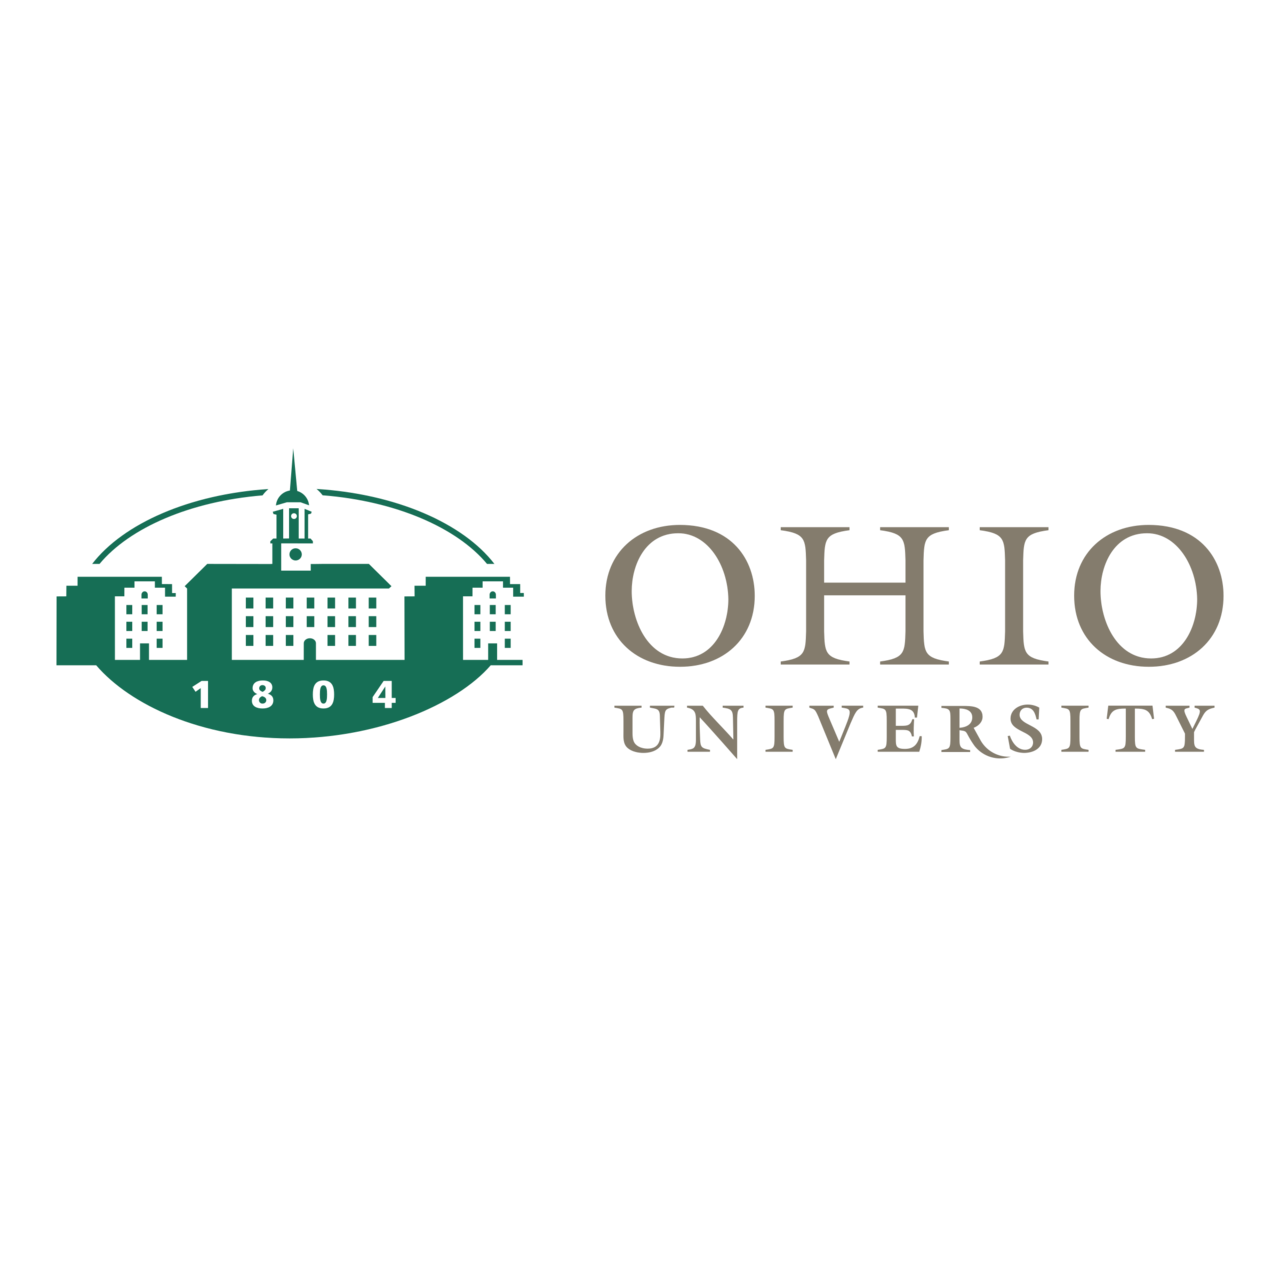 Download Ohio University Logo PNG and Vector (PDF, SVG, Ai, EPS) Free